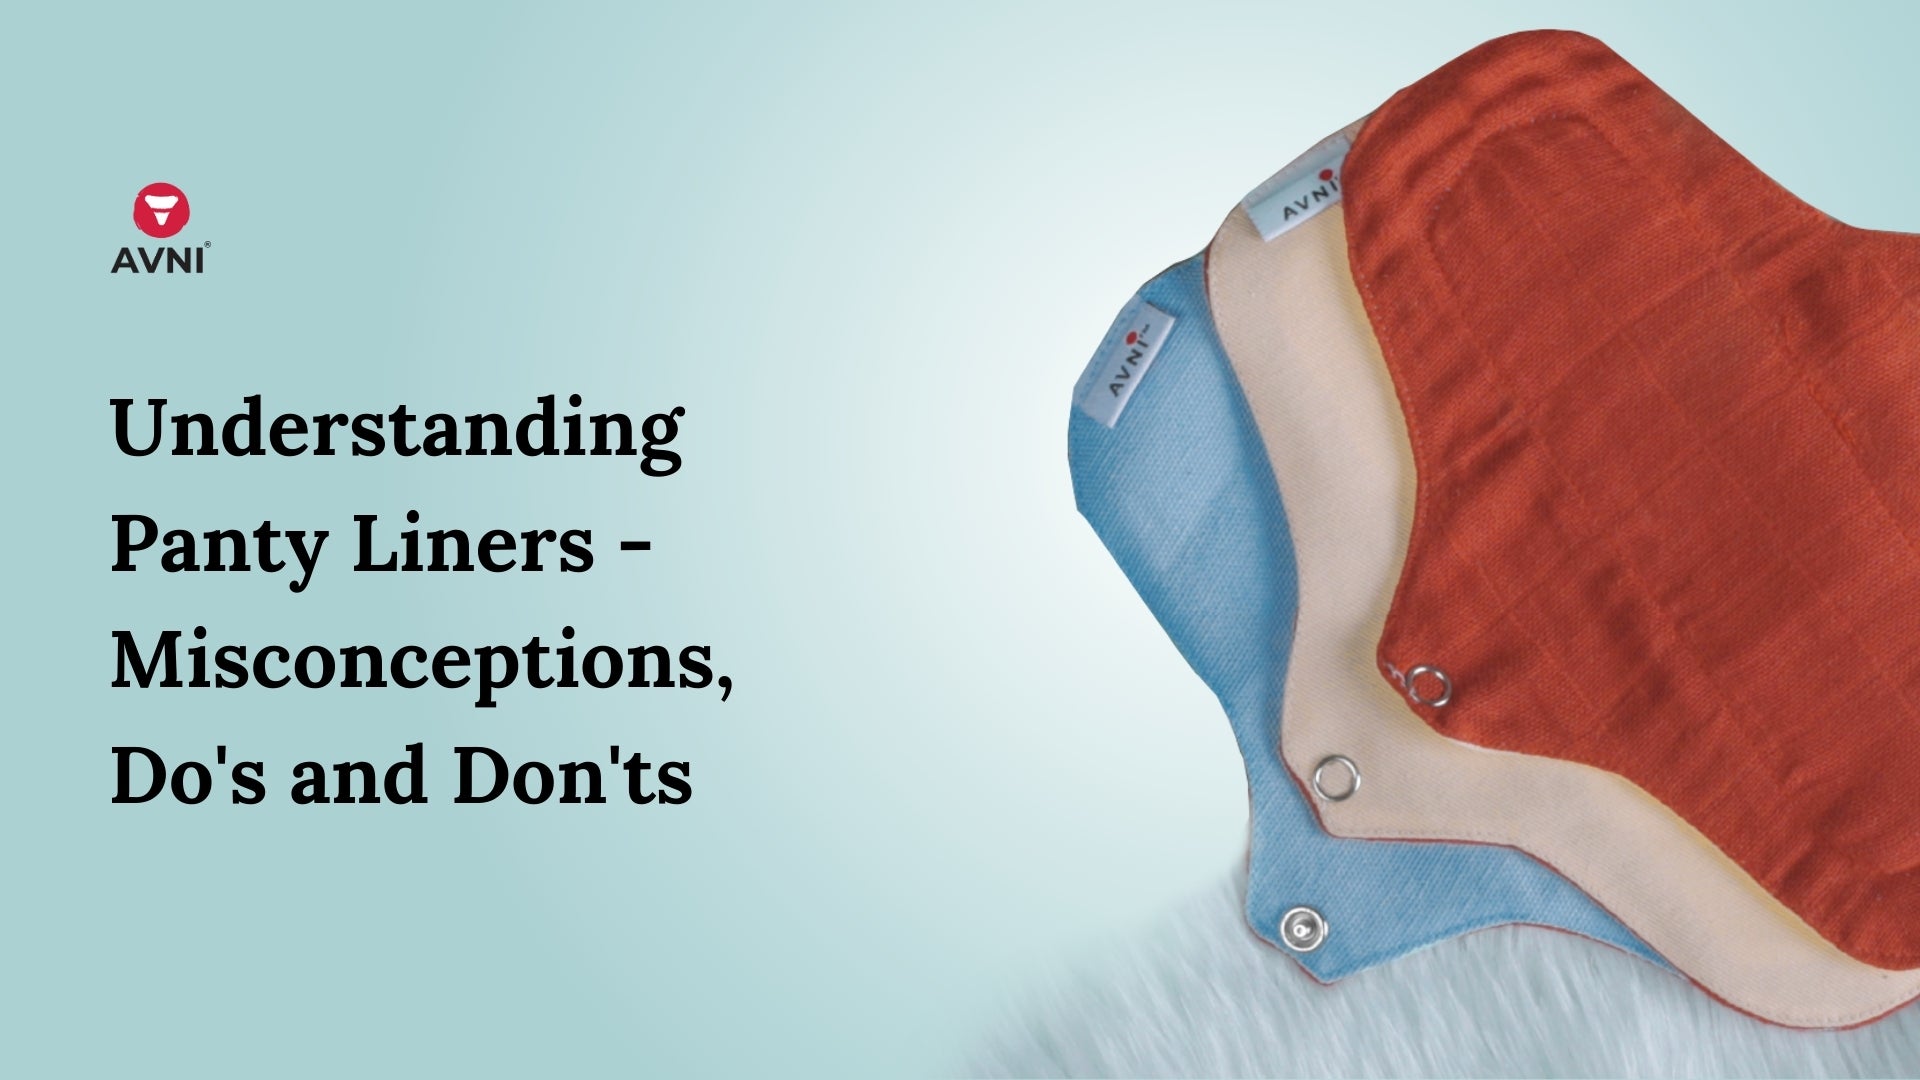 http://www.myavni.com/cdn/shop/articles/Understanding_Panty_Liners_-_Misconceptions_Do_s_and_Don_ts.jpg?v=1707552069&width=2048